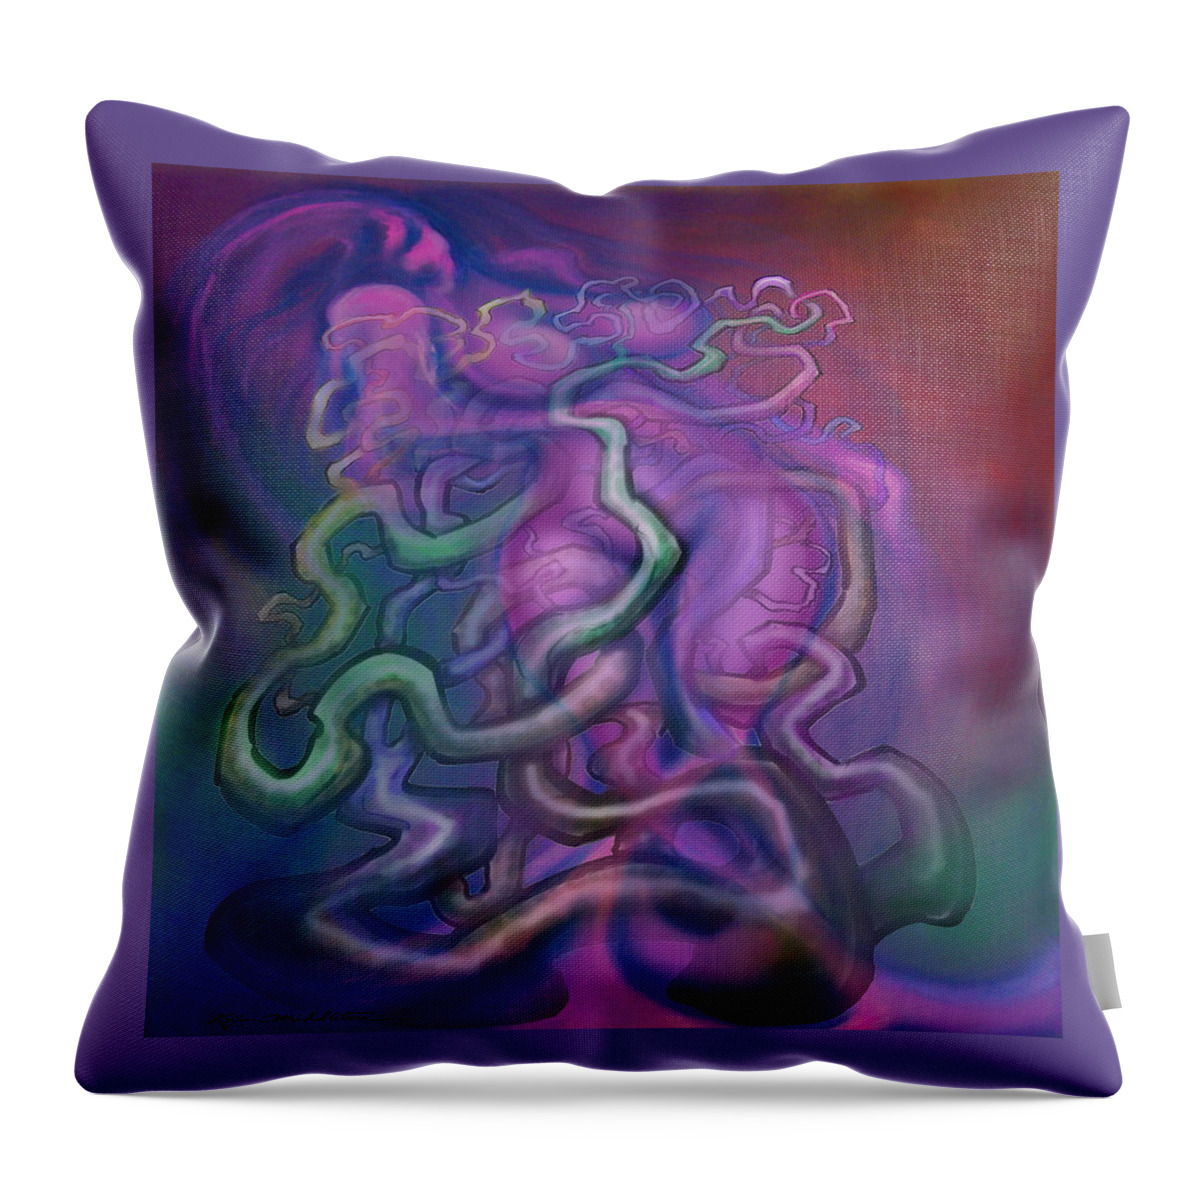 Surreal Throw Pillow featuring the digital art Struggles by Kevin Middleton